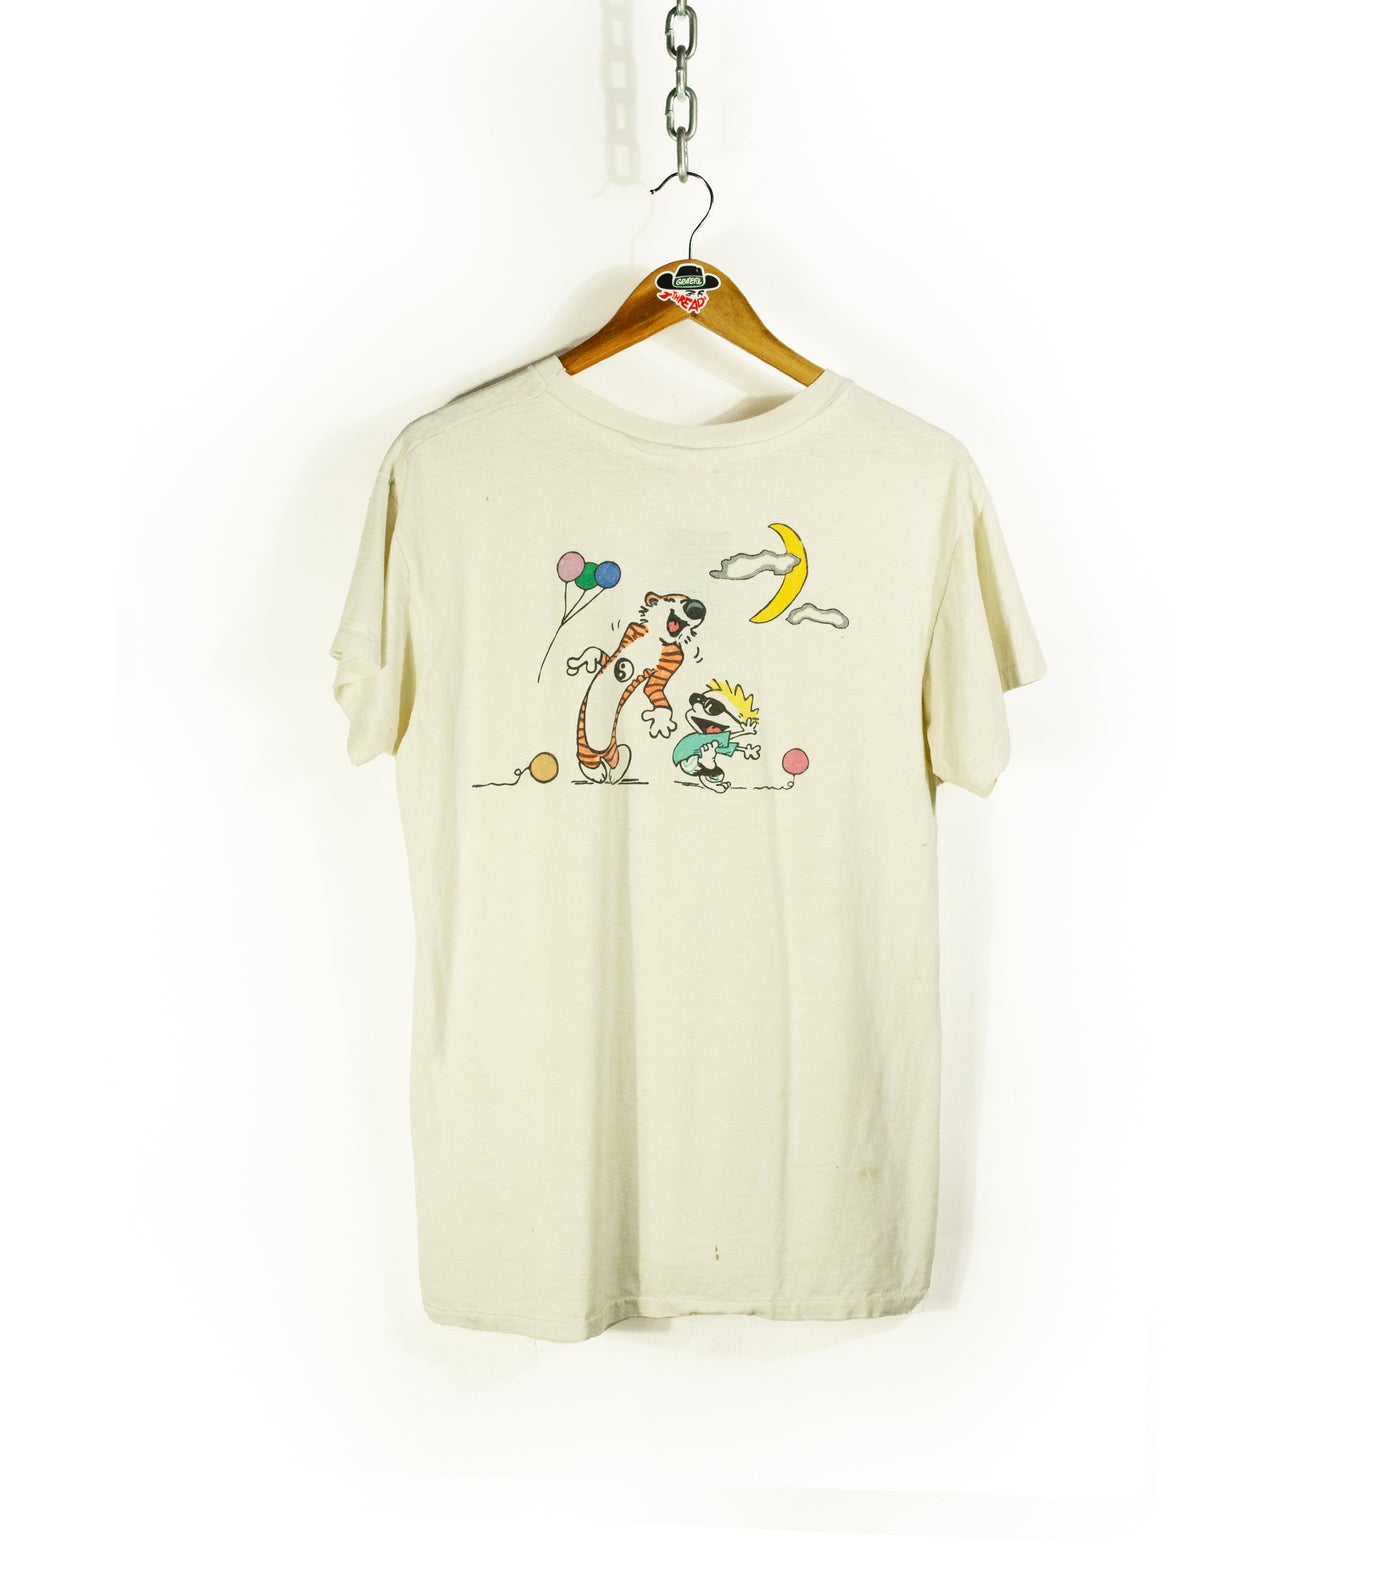 Vintage 80s Grateful Dead 'Never Had Such a Good Time' Calvin and Hobbes Lot T-Shirt